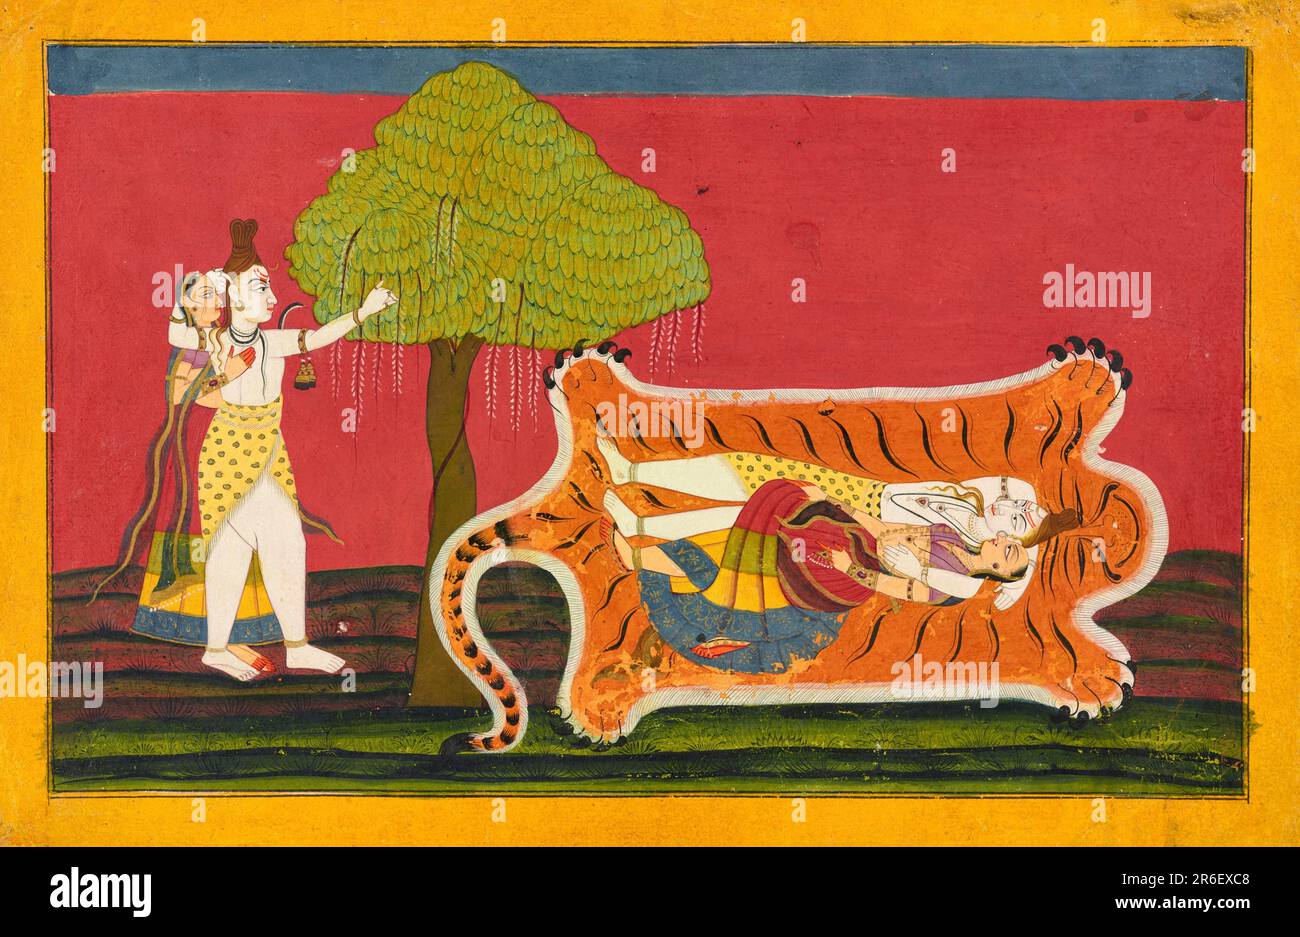 Close to the image are two thin black lines framing the image. Against a red background, on the left, Shiva walks with Parvati past a large tree. On the right, the couple lie down on a tiger skin. Yellow border. Opaque watercolor and gold on paper. Origin: Nurpur, Himachal Pradesh state, India. Date: ca. 1710 - ca. 1715. Museum: Freer Gallery of Art and Arthur M. Sackler Gallery. Stock Photo